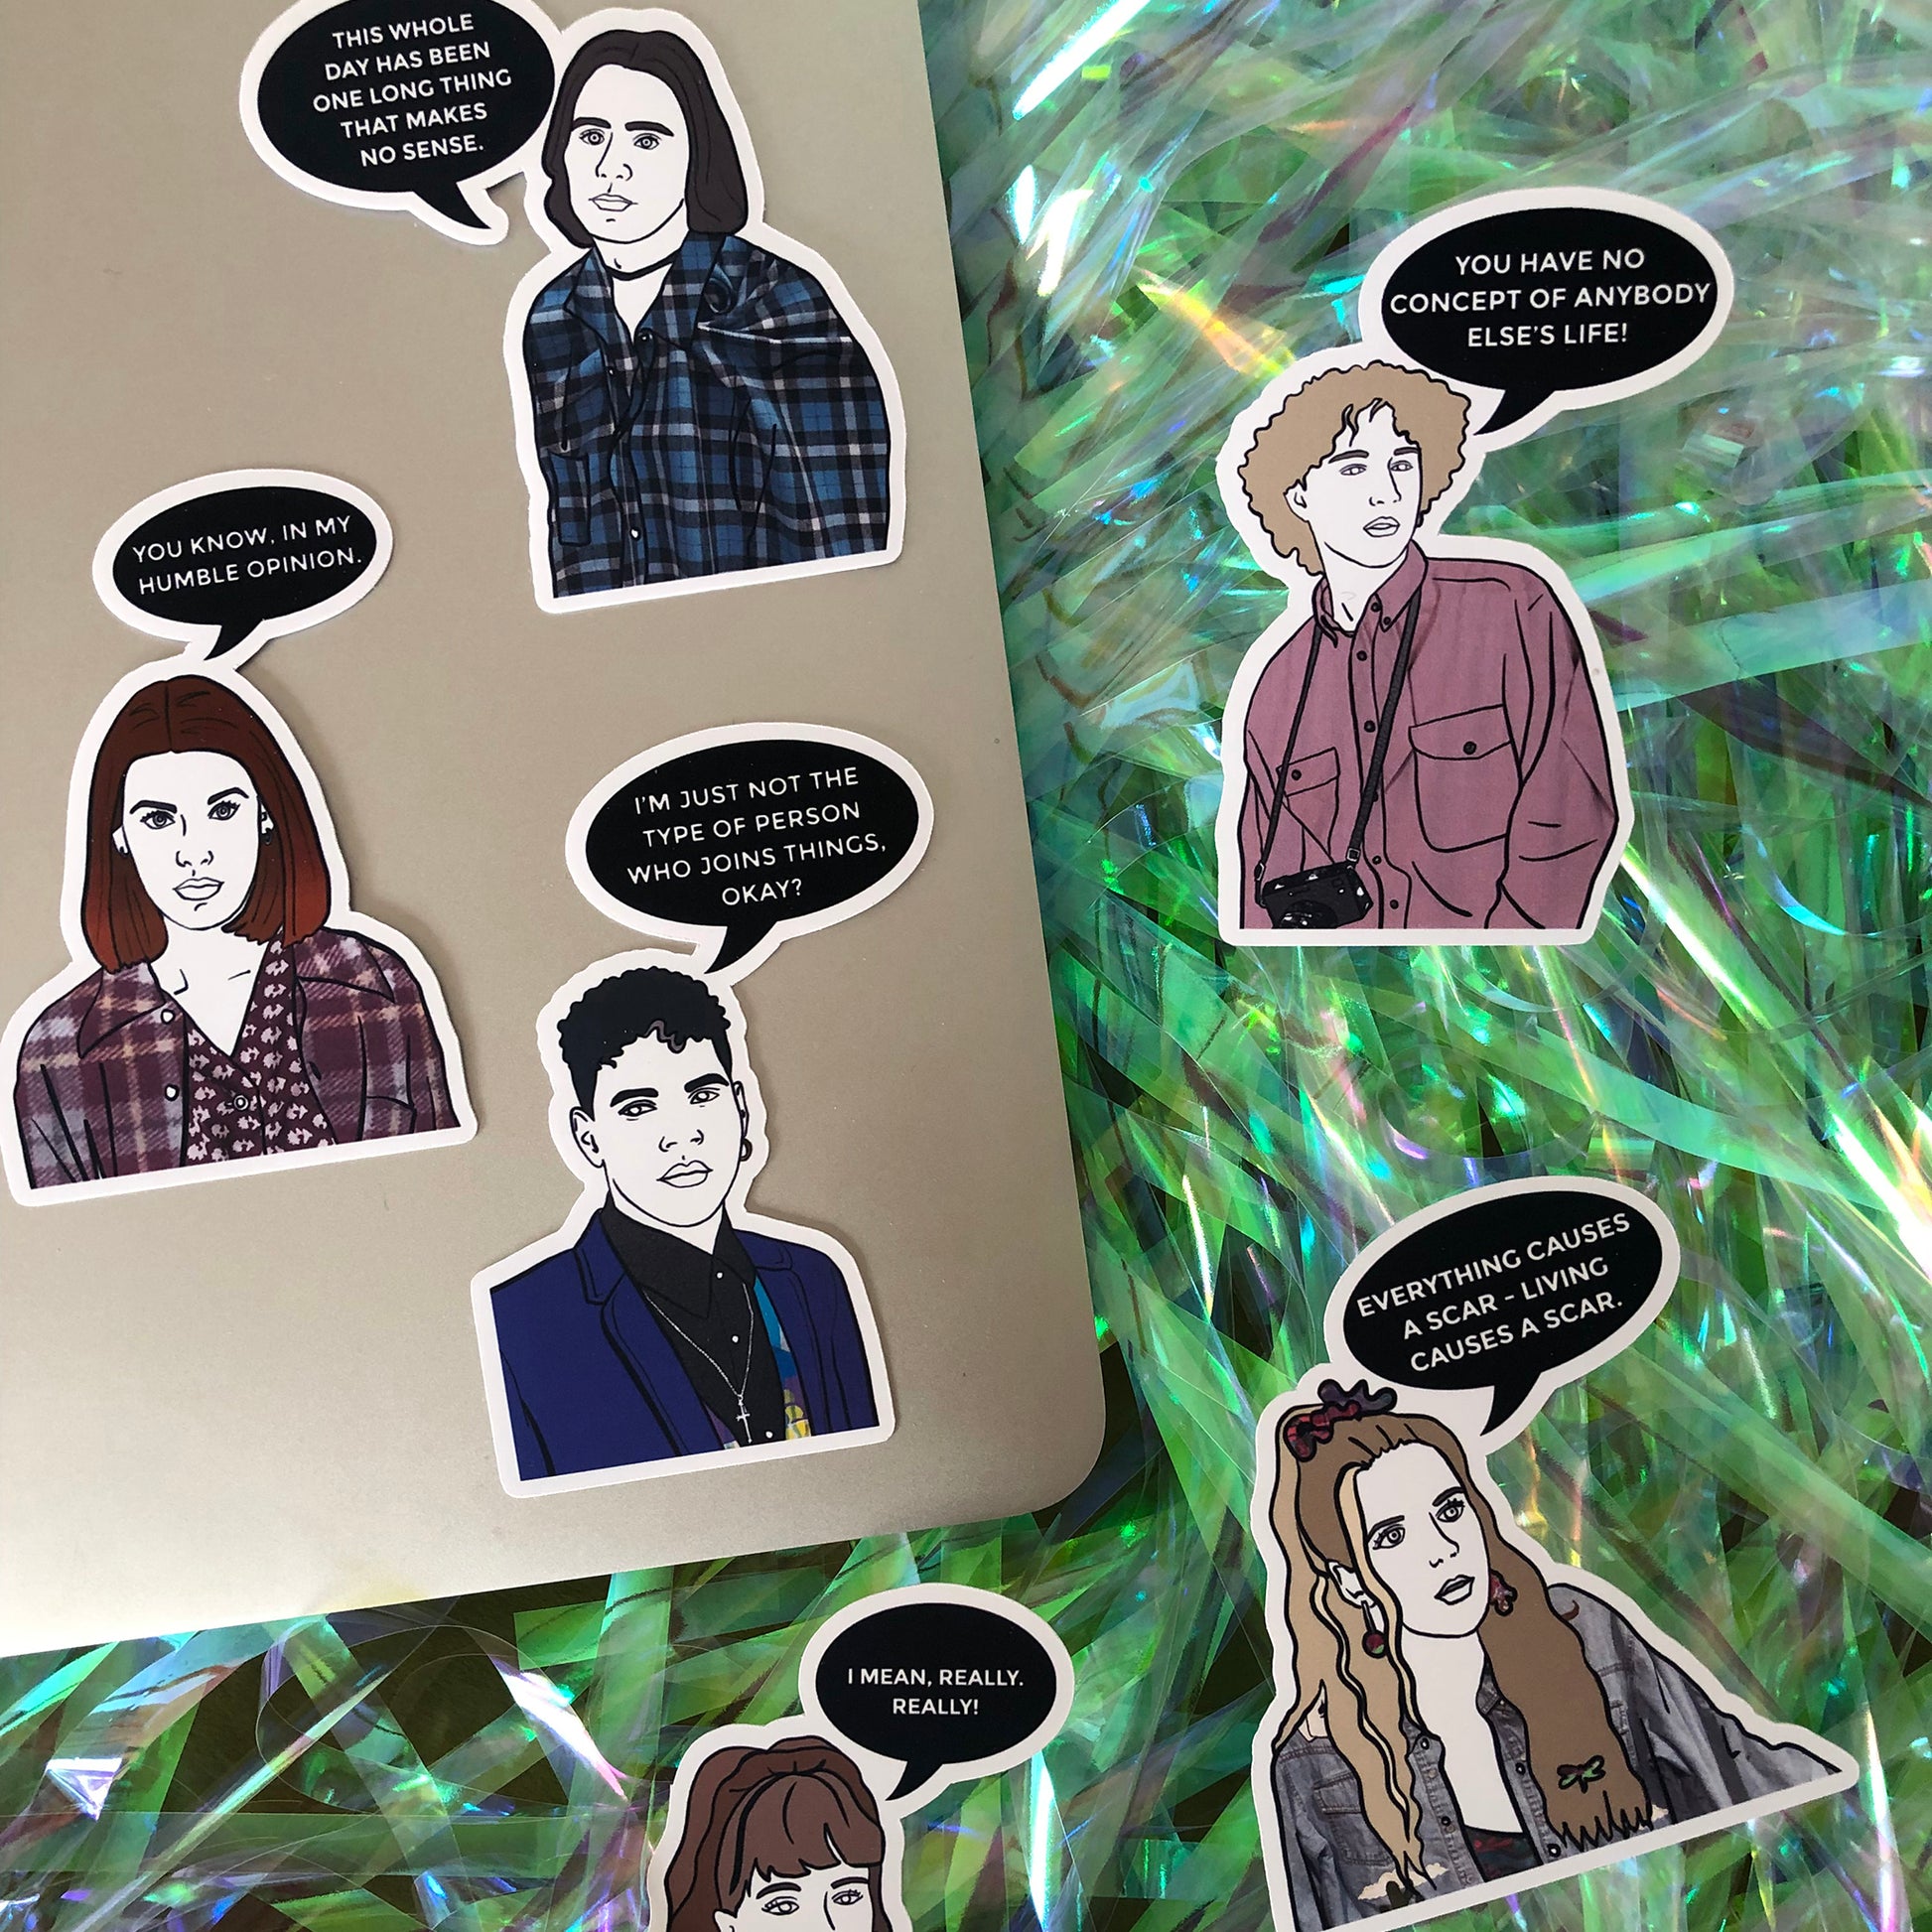 Image shows a fun set of stickers inspired by 90s tv series My So Called Life